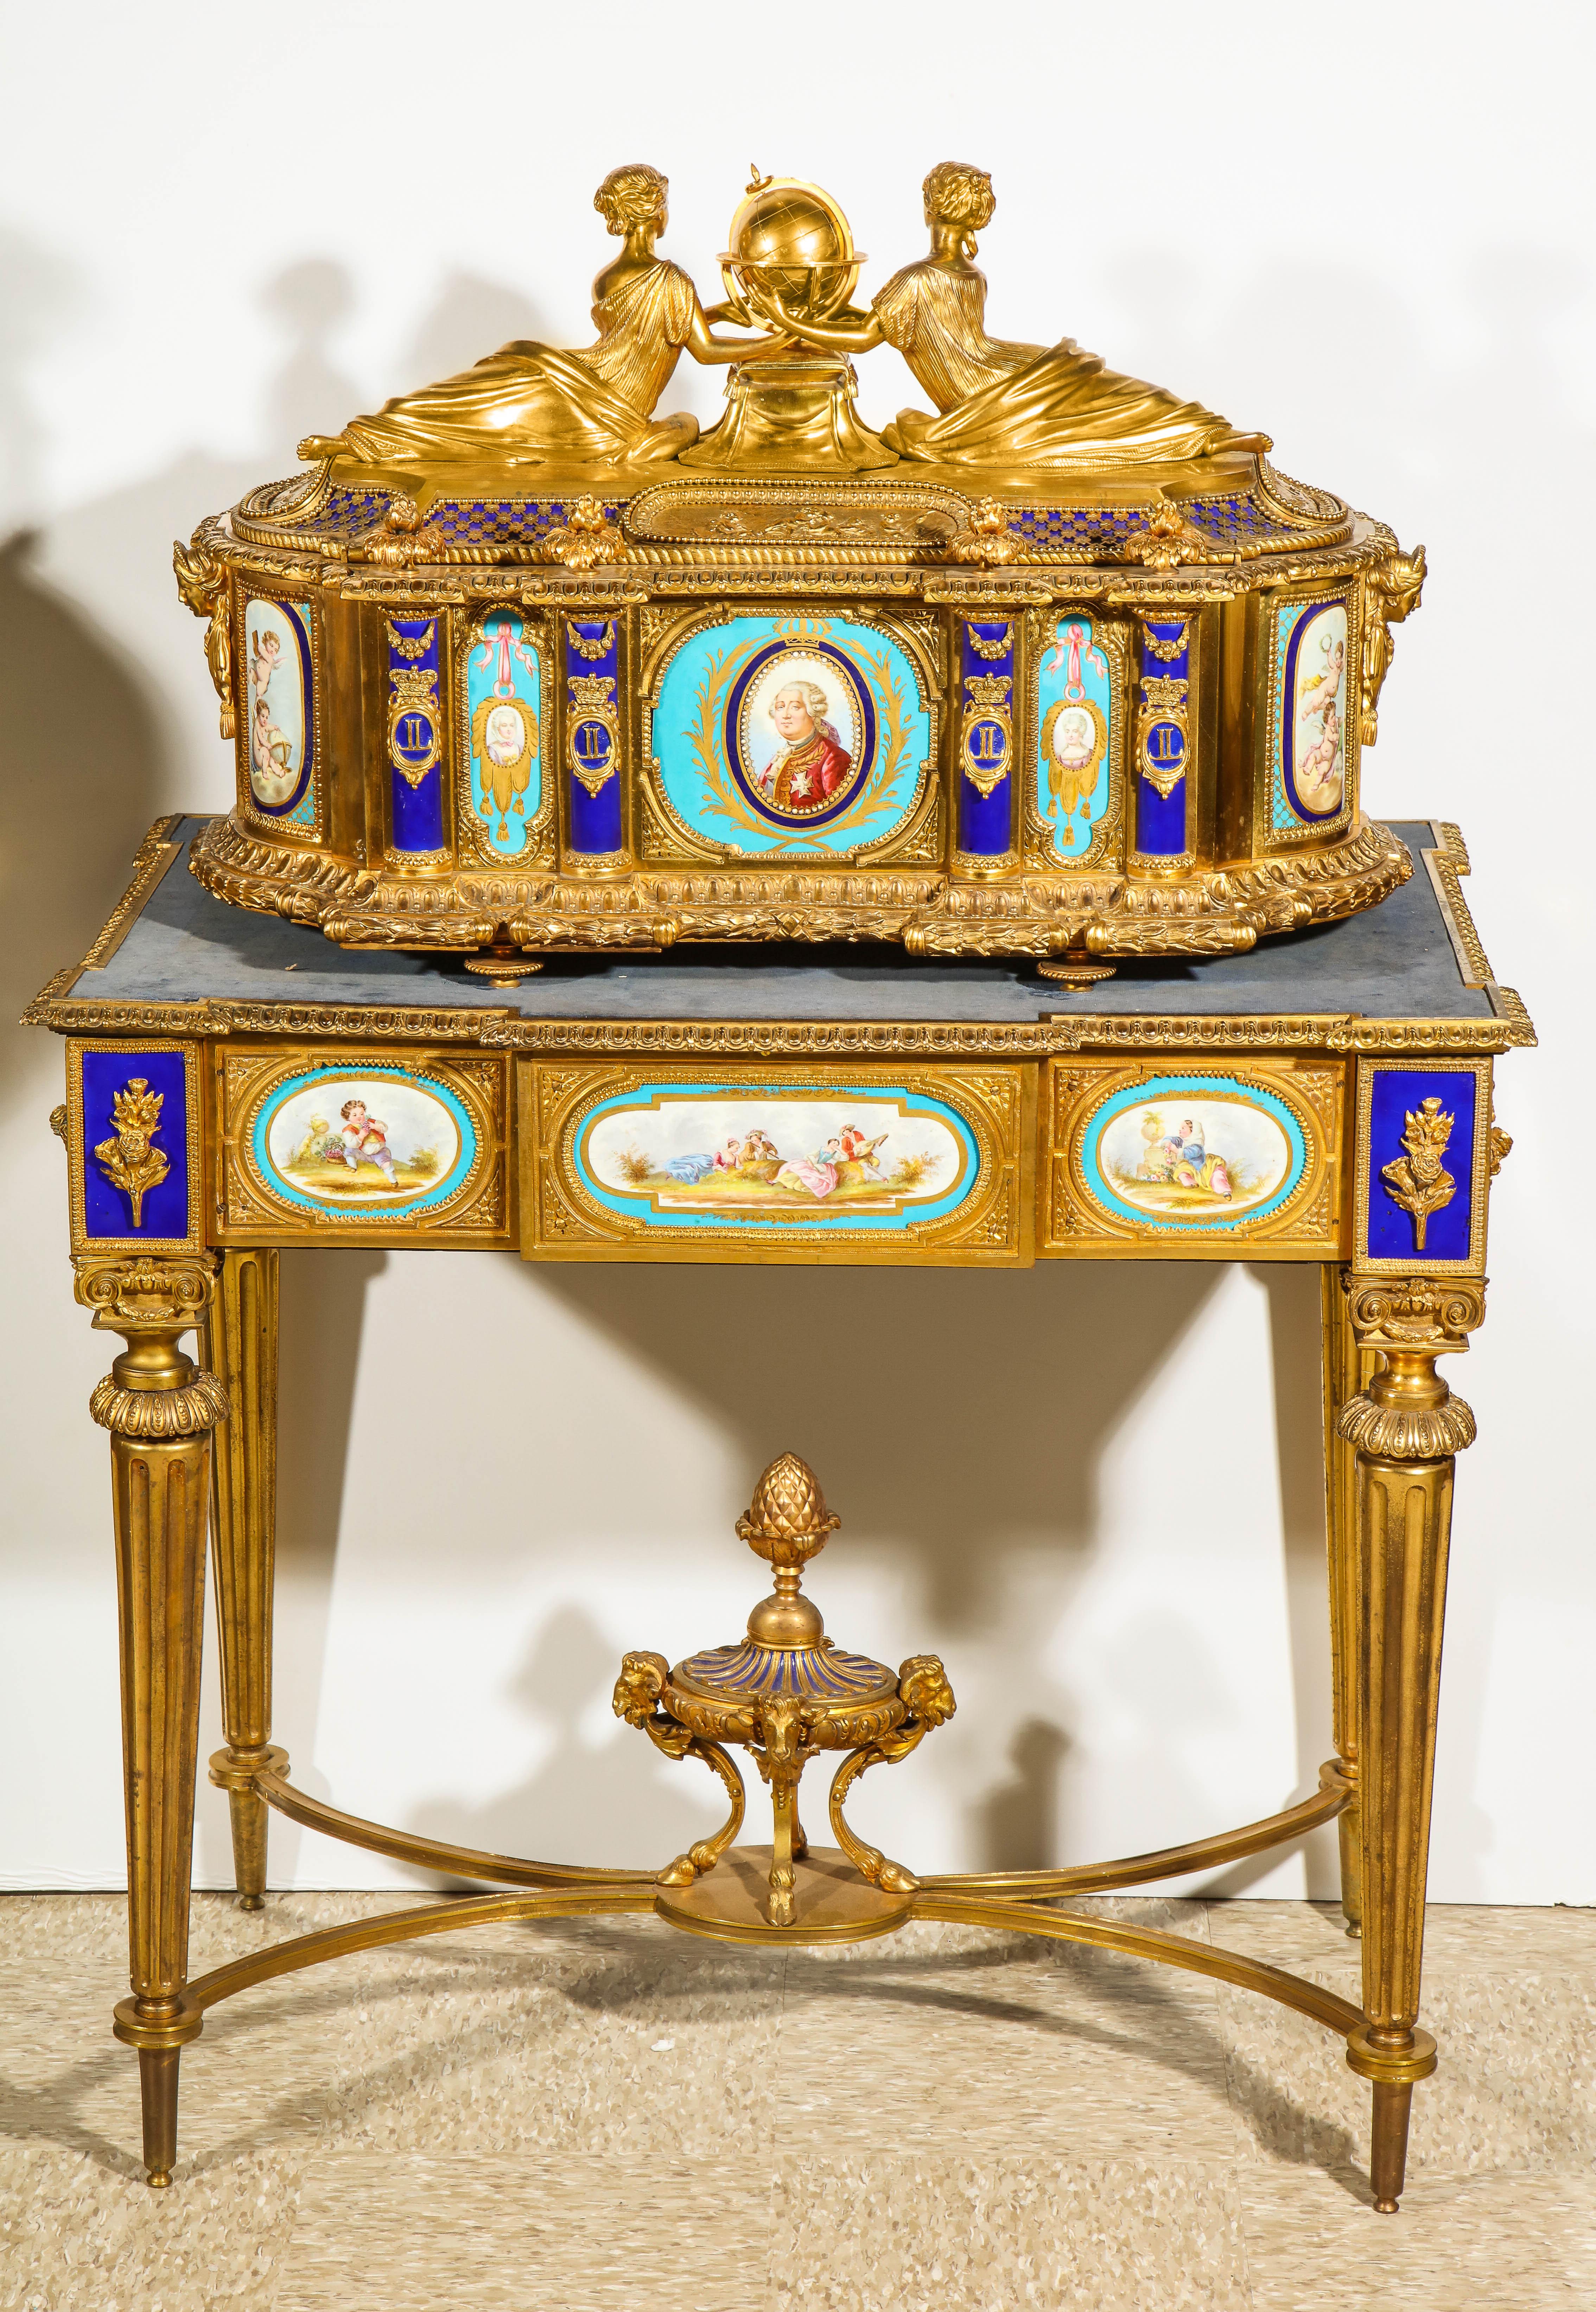 A rare and important French ormolu/bronze and Sevres style turquoise porcelain jewelry box casket on matching French ormolu/bronze table with Sevres style porcelain plaques.

Of palatial / monumental size!

